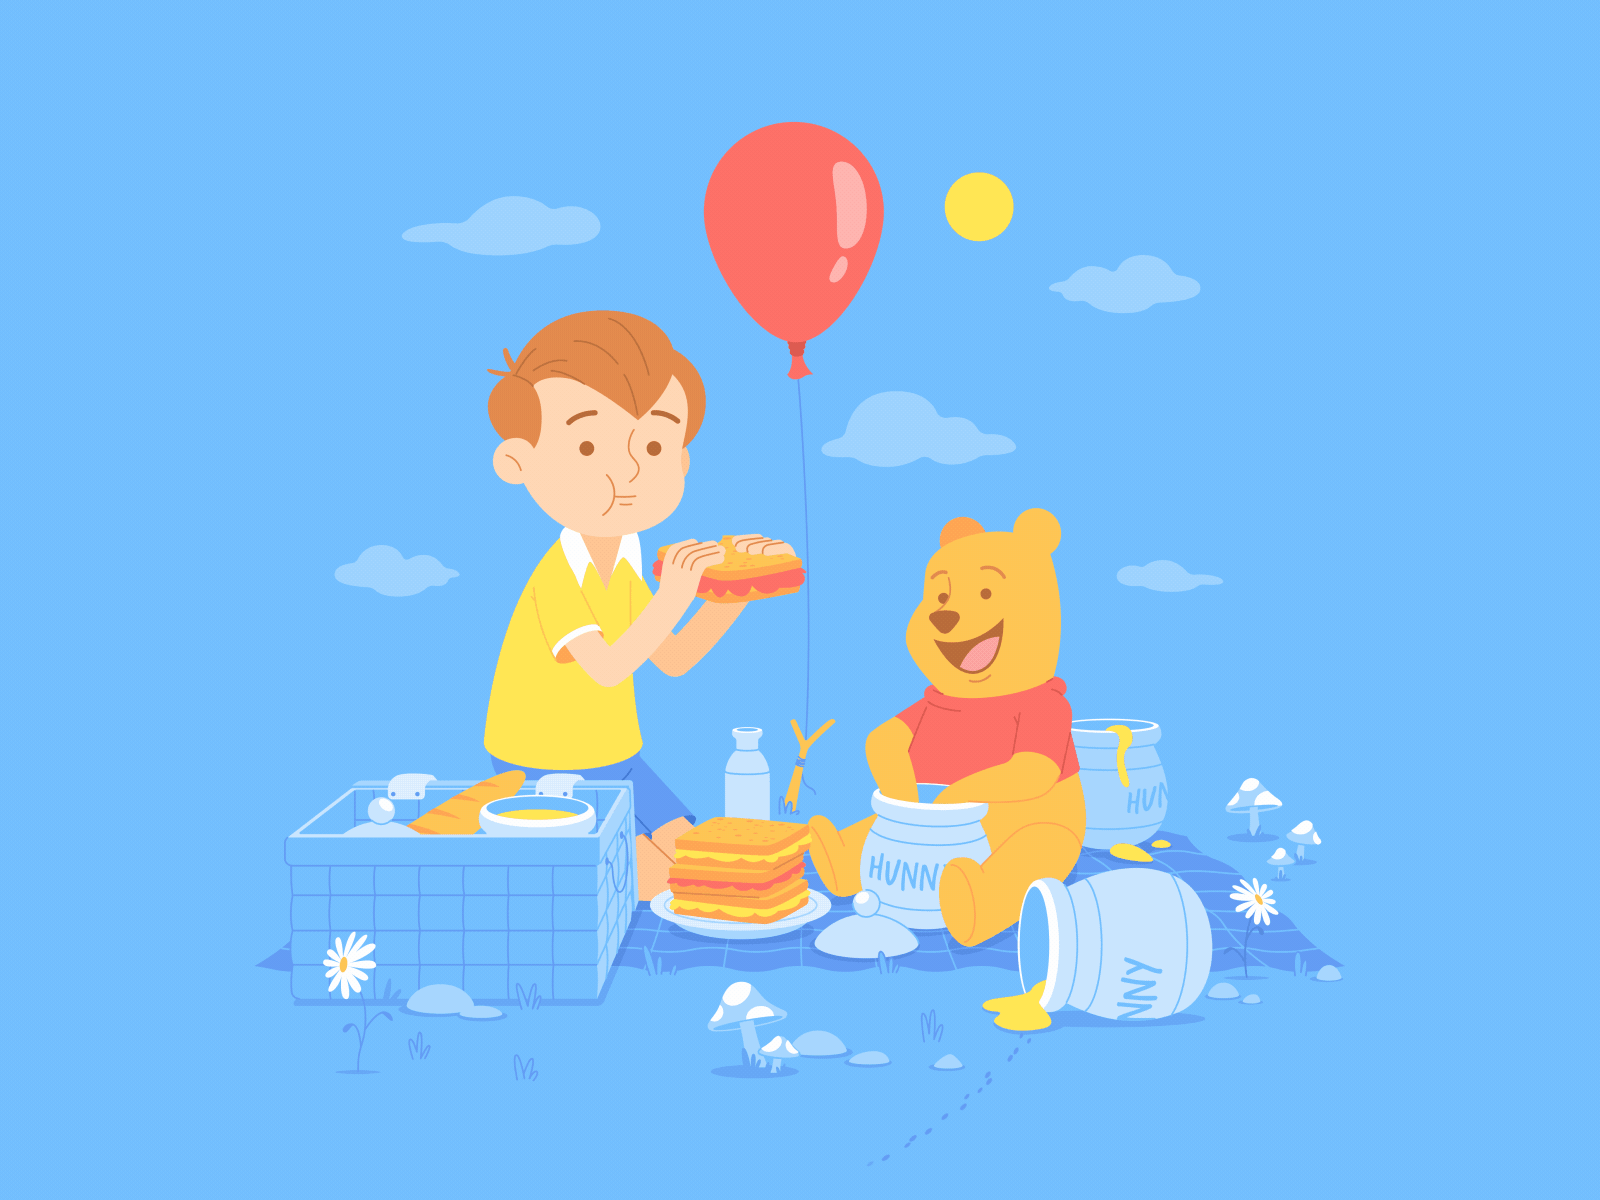 Disney - Winnie the Pooh after effects animated gif cartoon character animation character design flat gif illustration loop vector